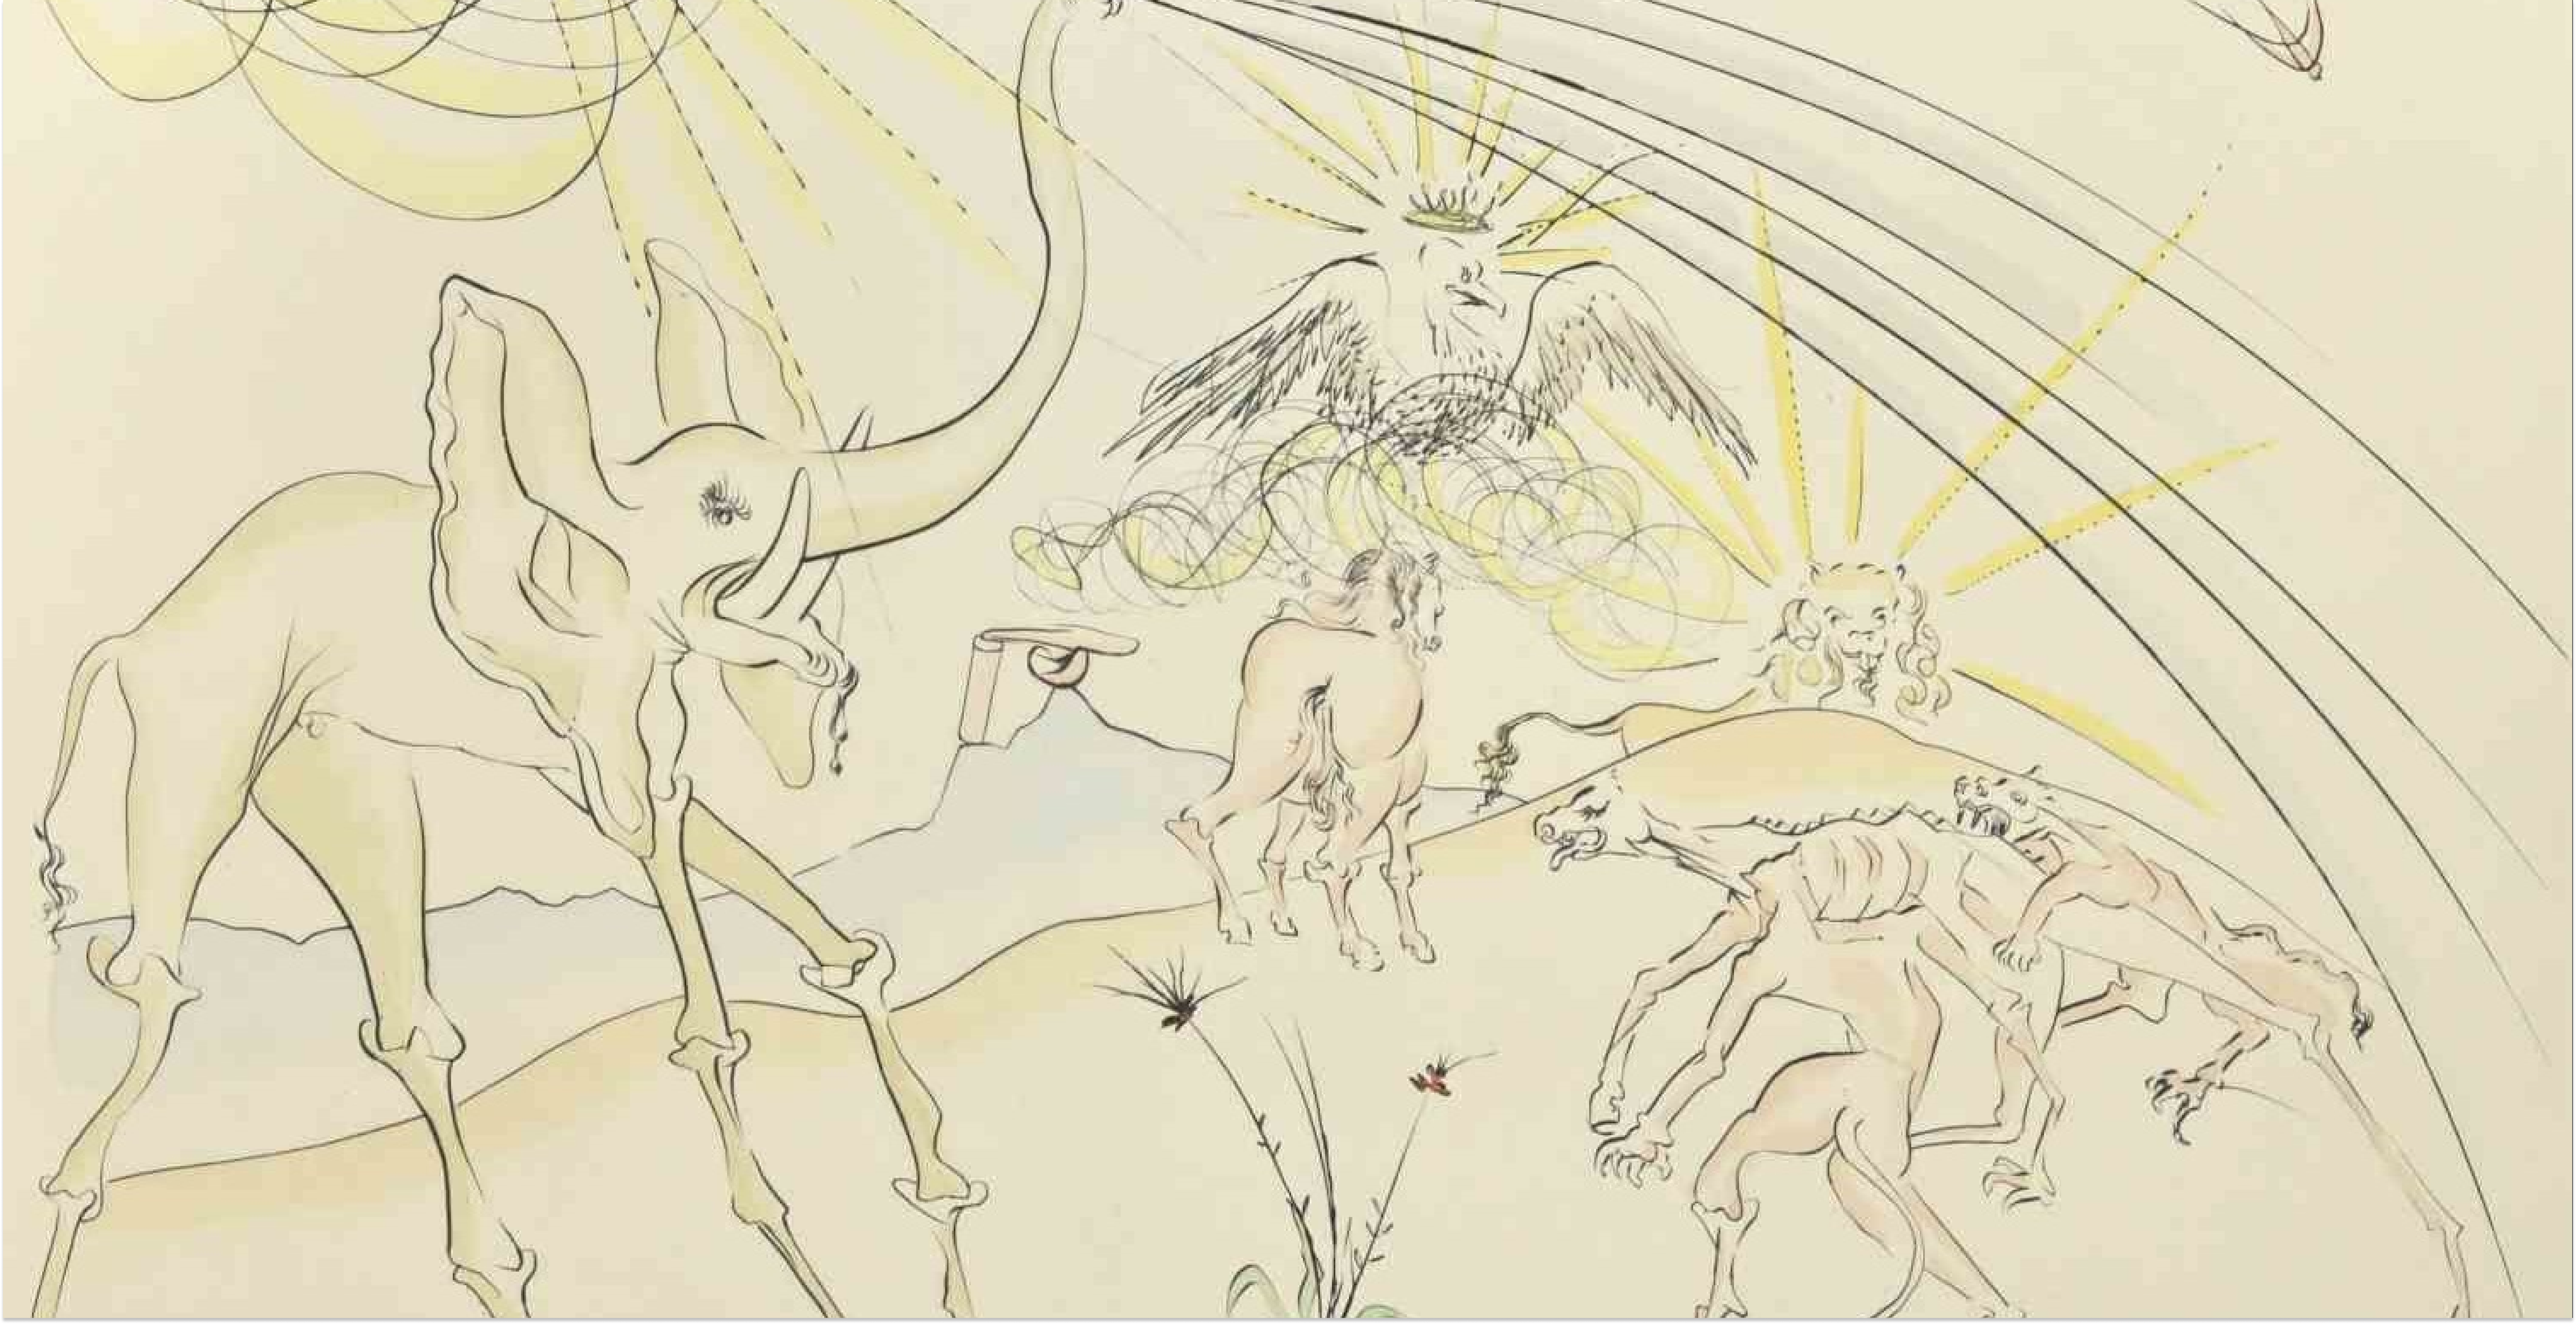 A Fantastic Journey in Salvador Dalí's Surrealist Bestiary